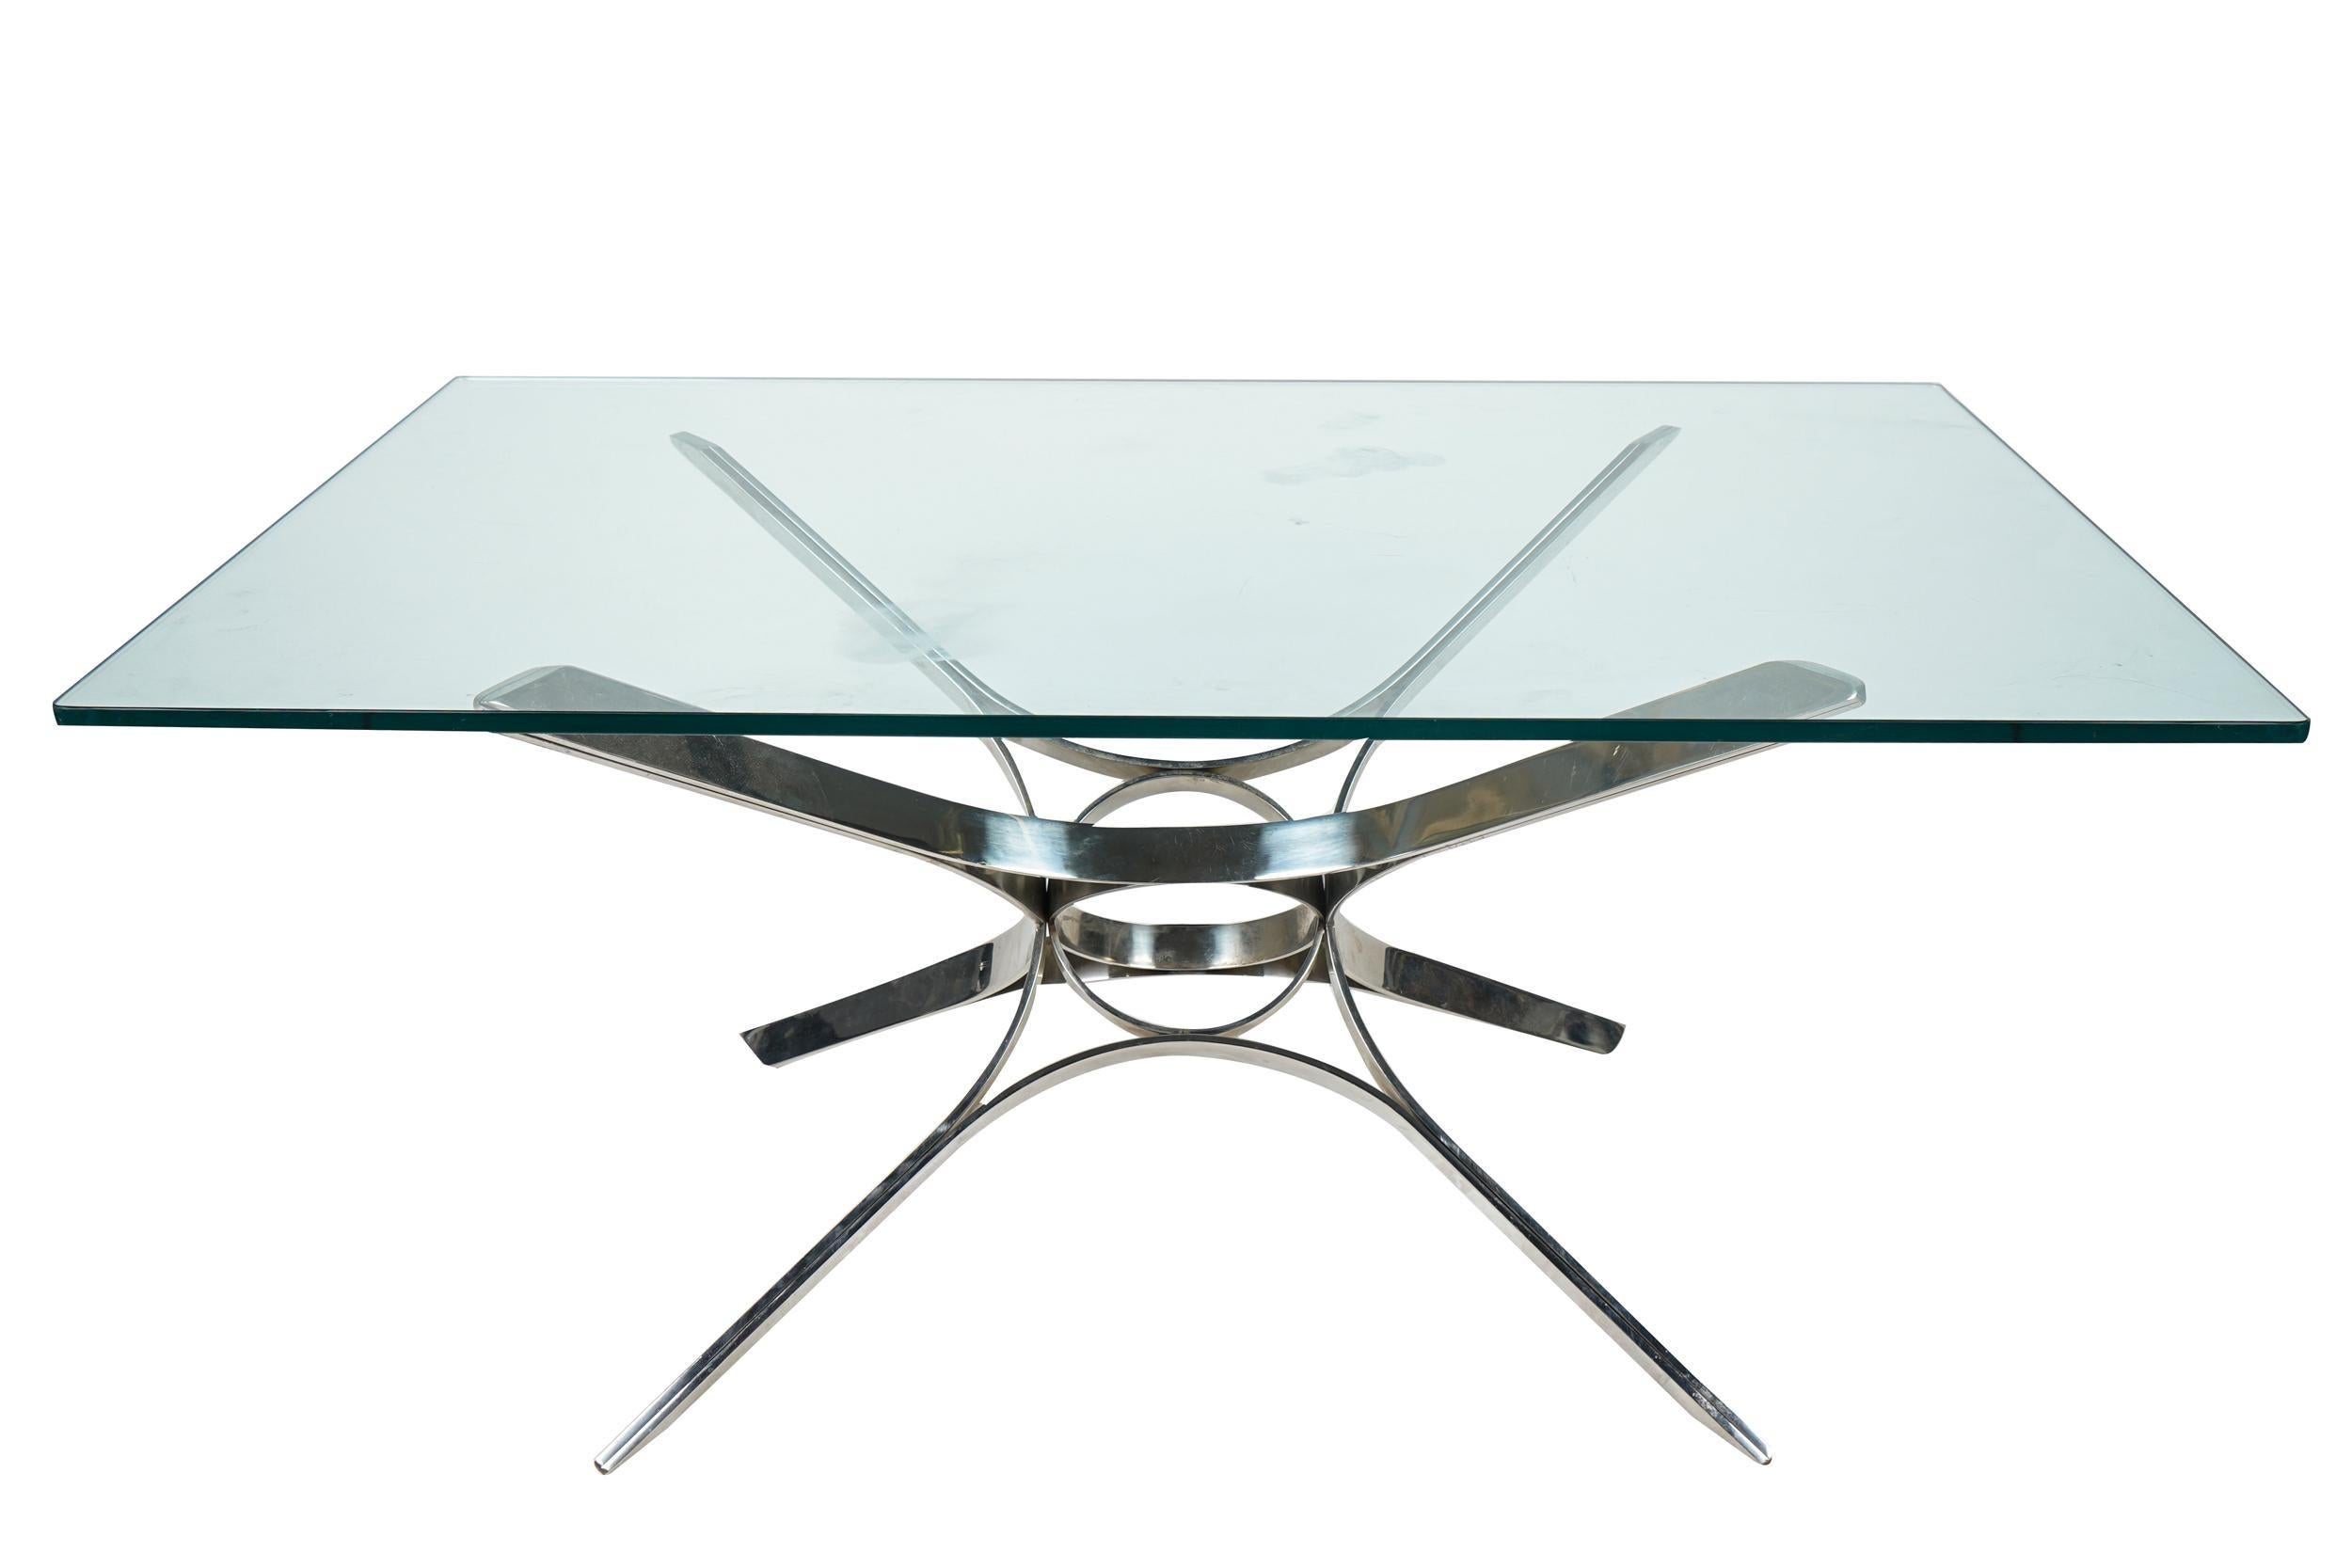 Sculptural chrome and glass coffee table designed by Roger Sprunger for Dunbar Furniture.
 